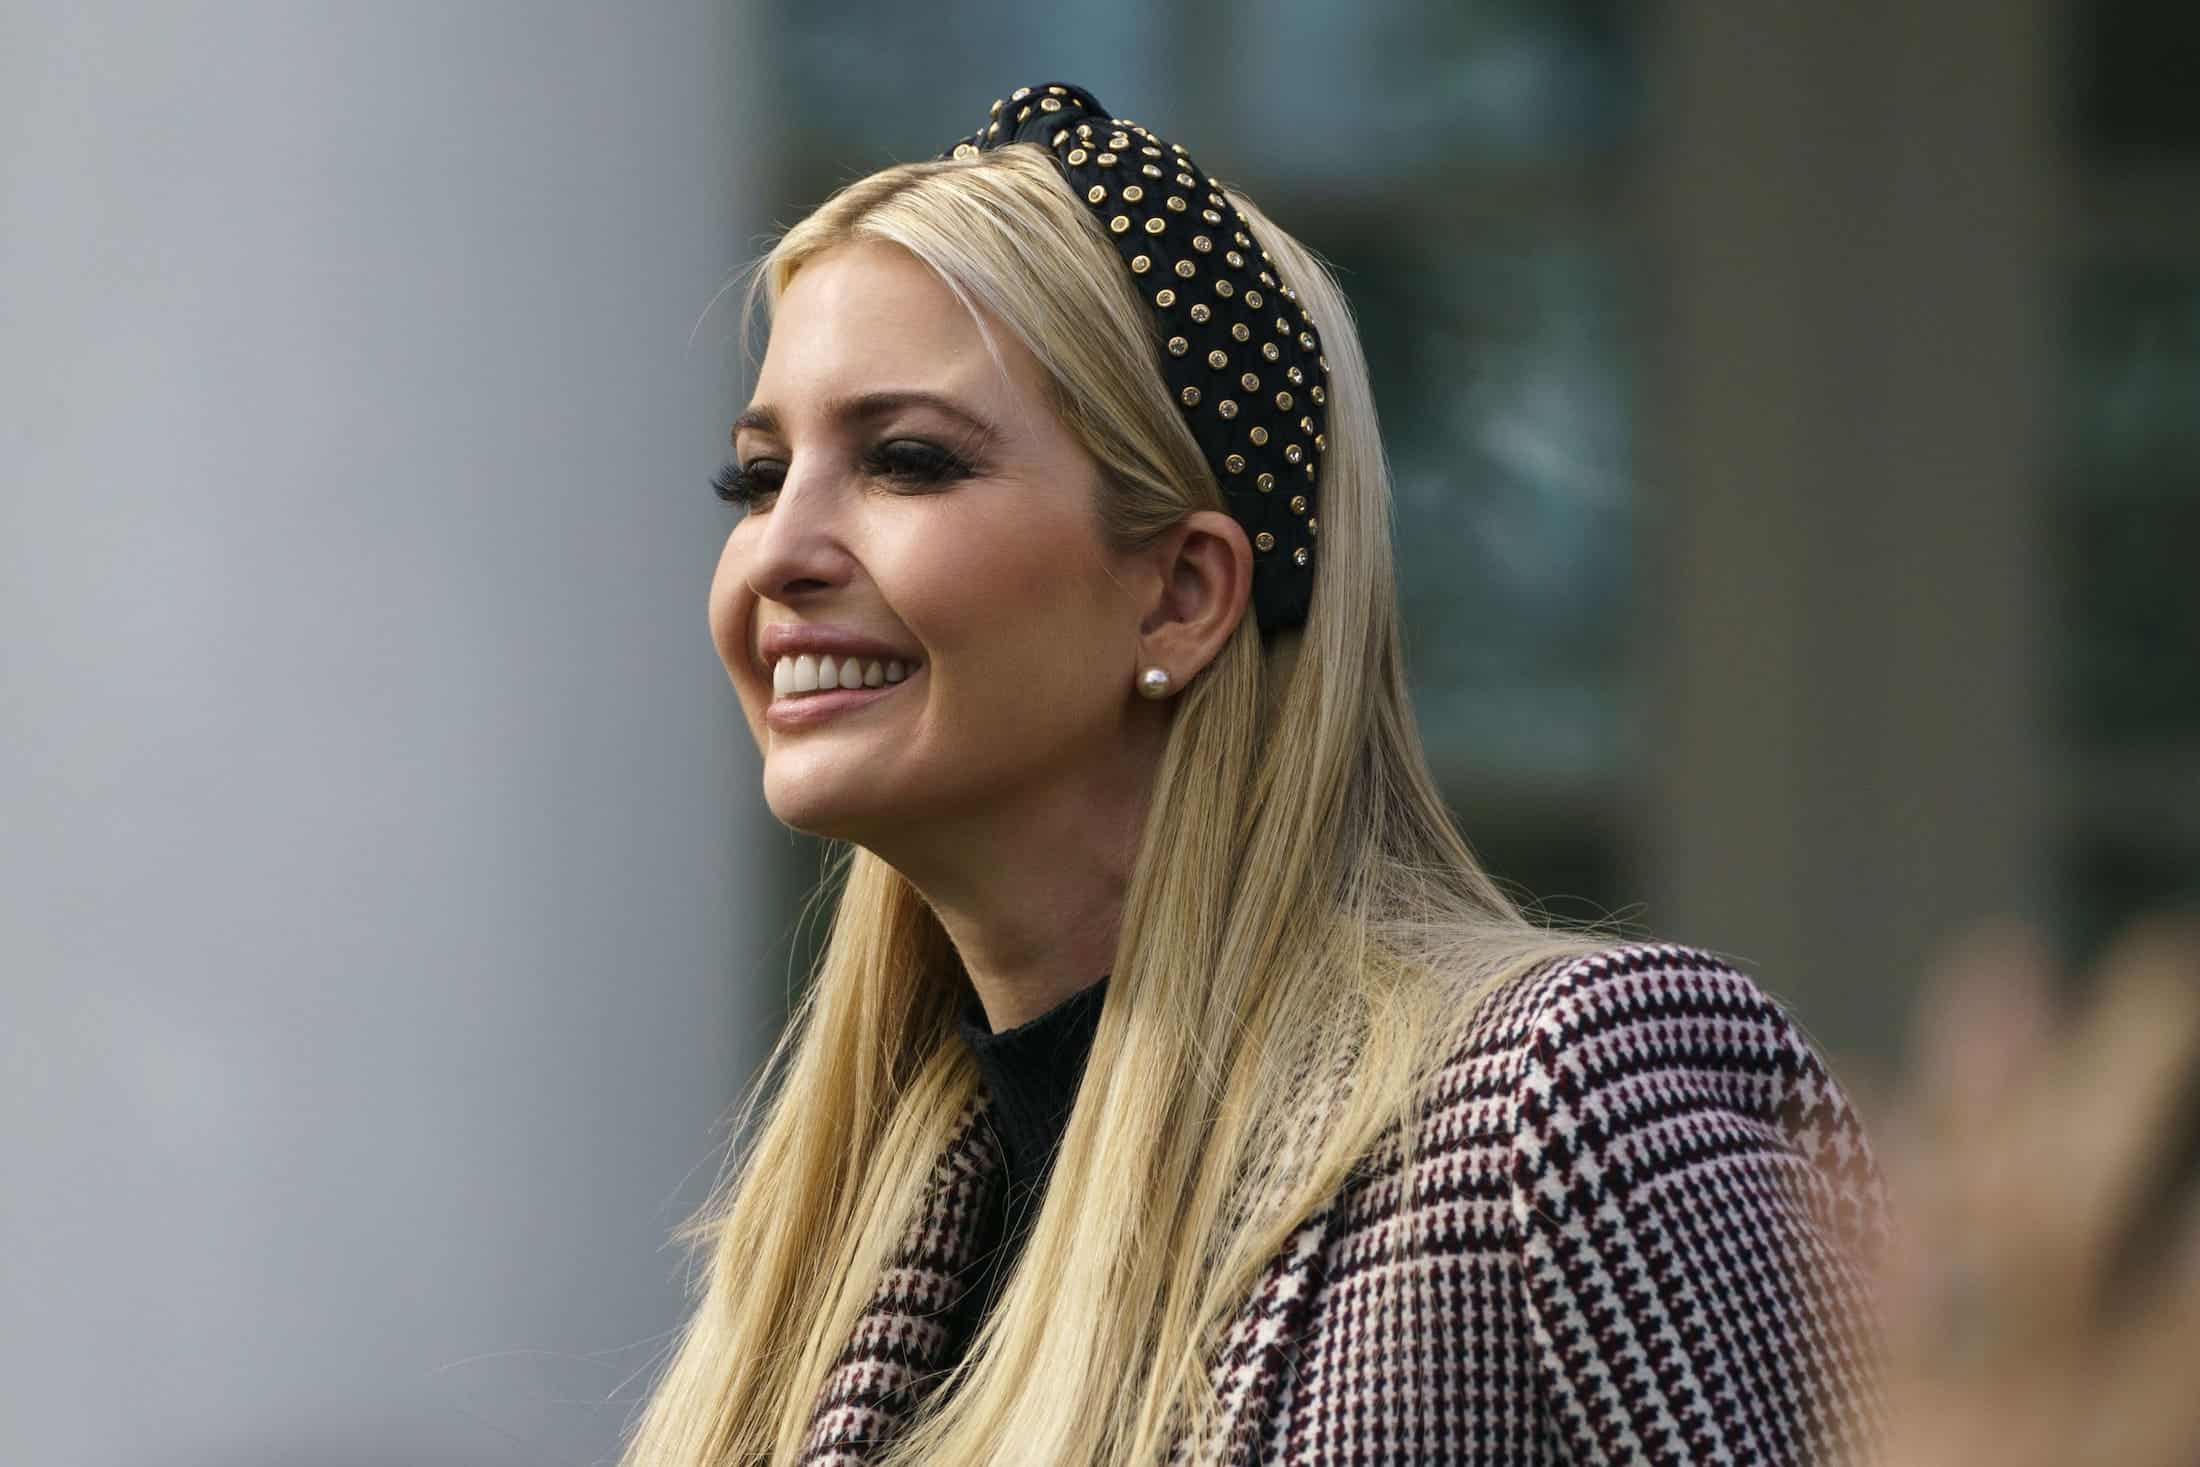 ‘Tone-deaf’ – Reactions as Ivanka Trump reveals how she has spent her time during pandemic